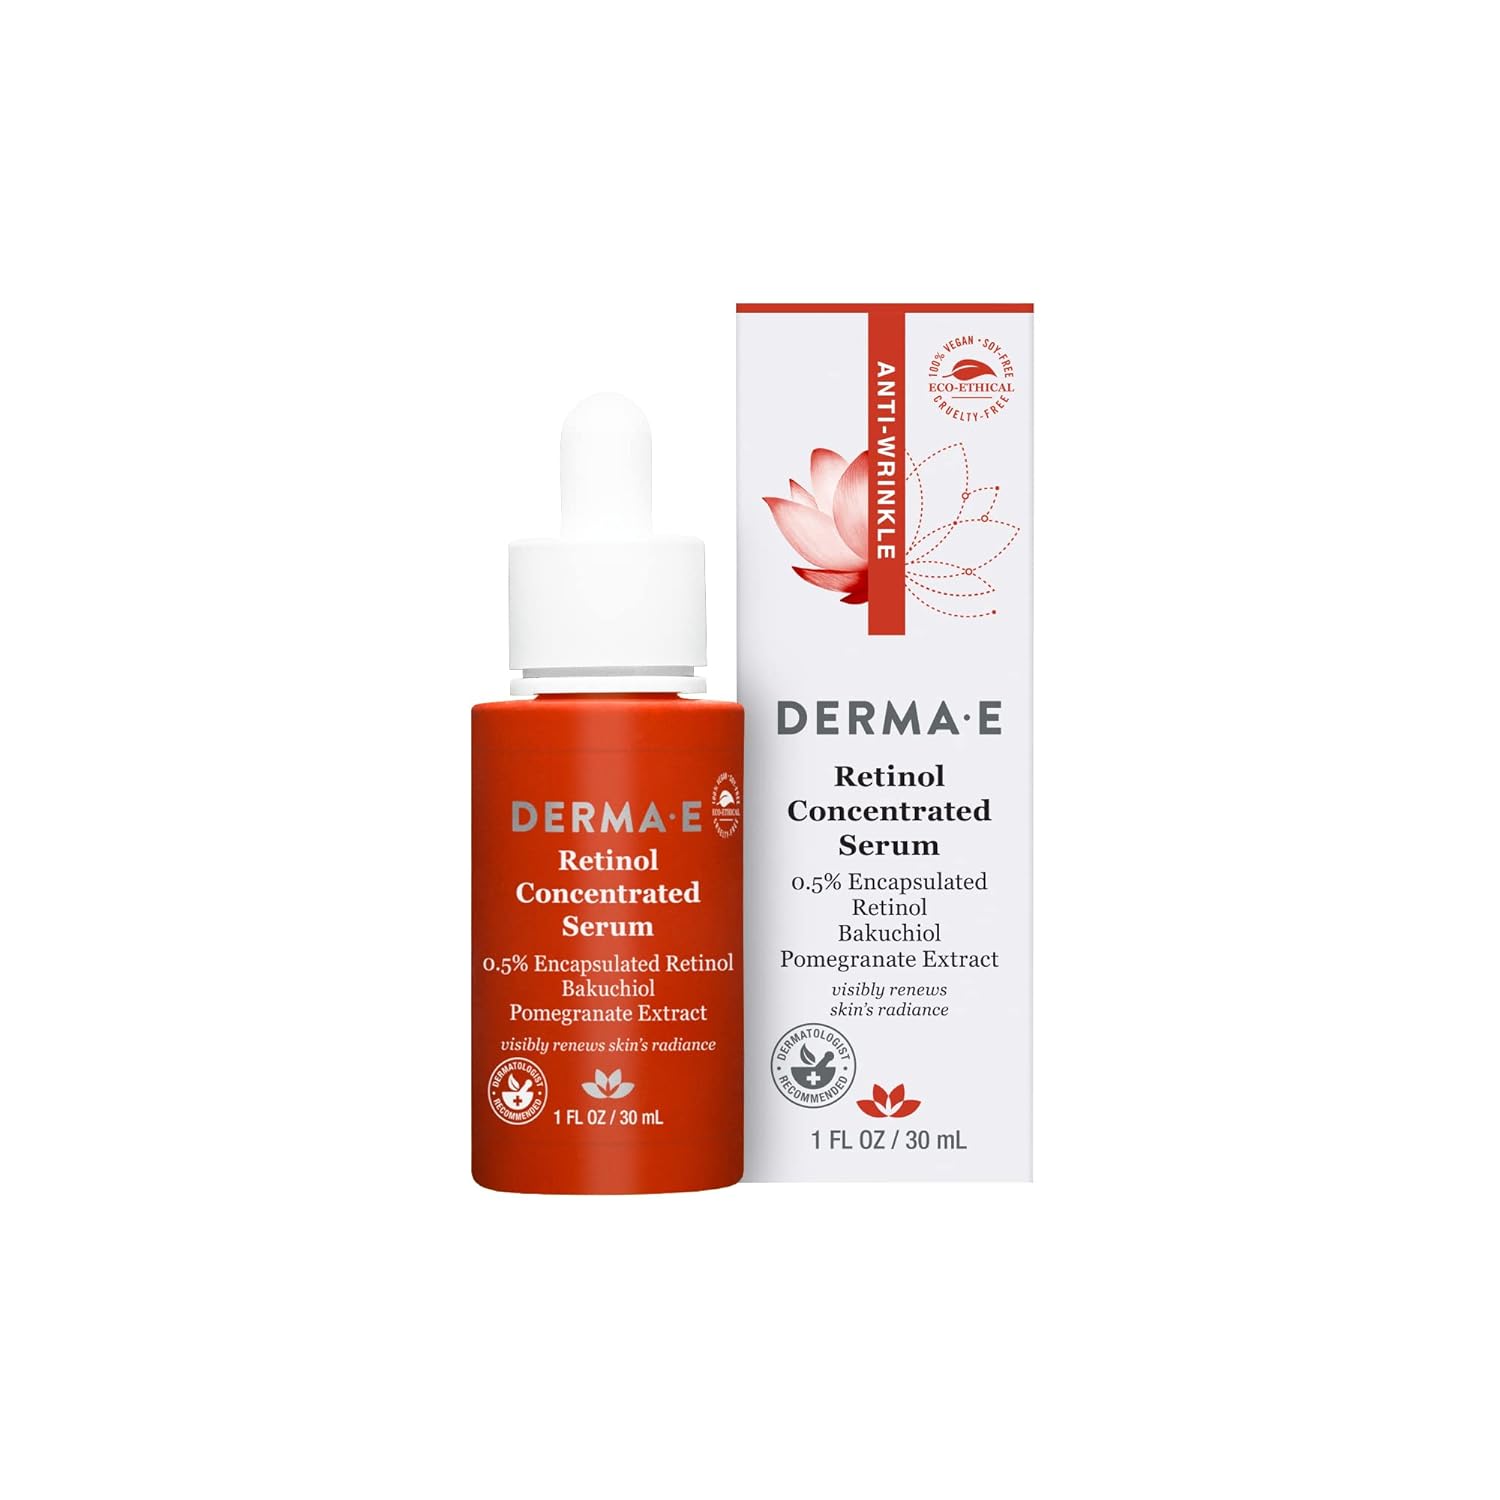 DERMA E Anti-Wrinkle Retinol Serum - Concentrated Skincare Elixir for Youthful Radiance - 1 Fl oz